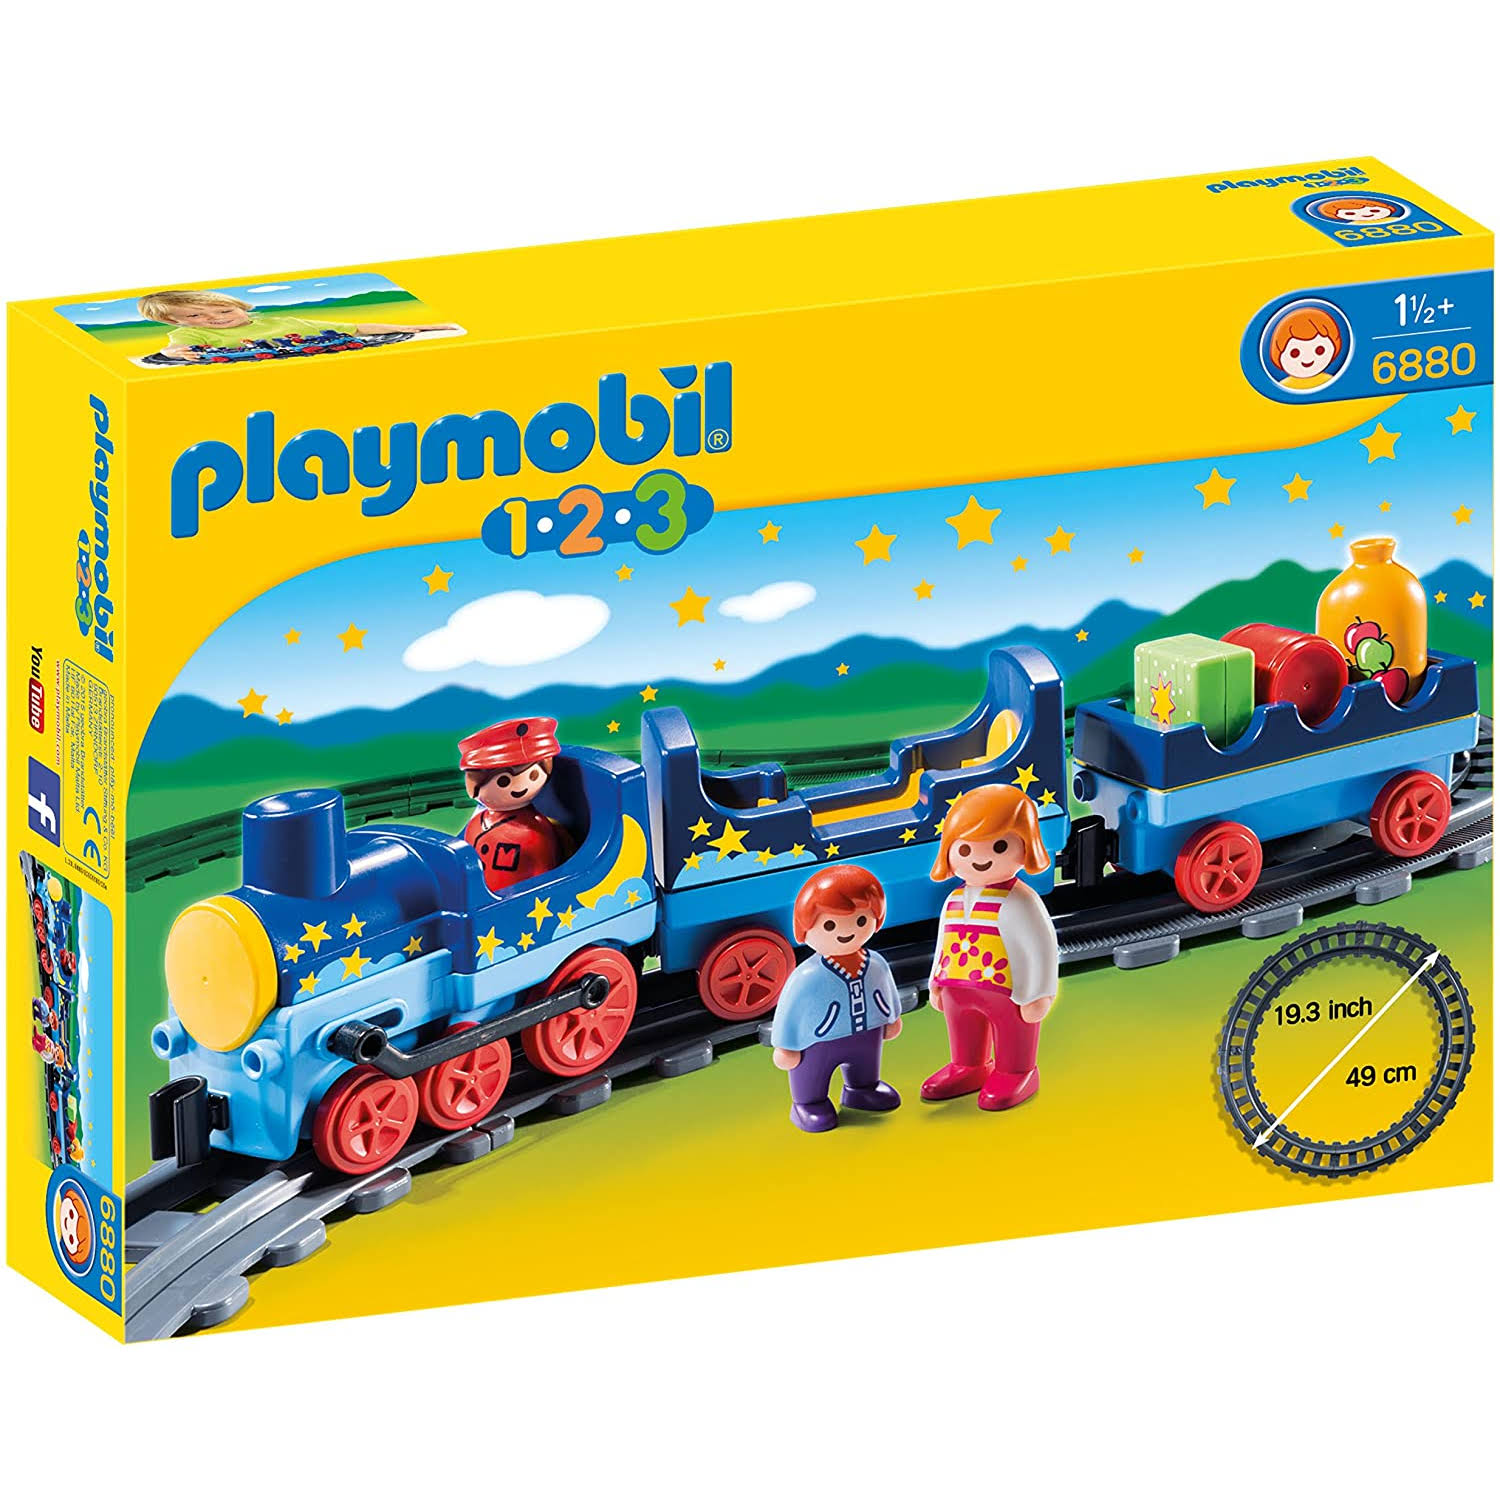 Playmobil 6880 123 Night Train With Track